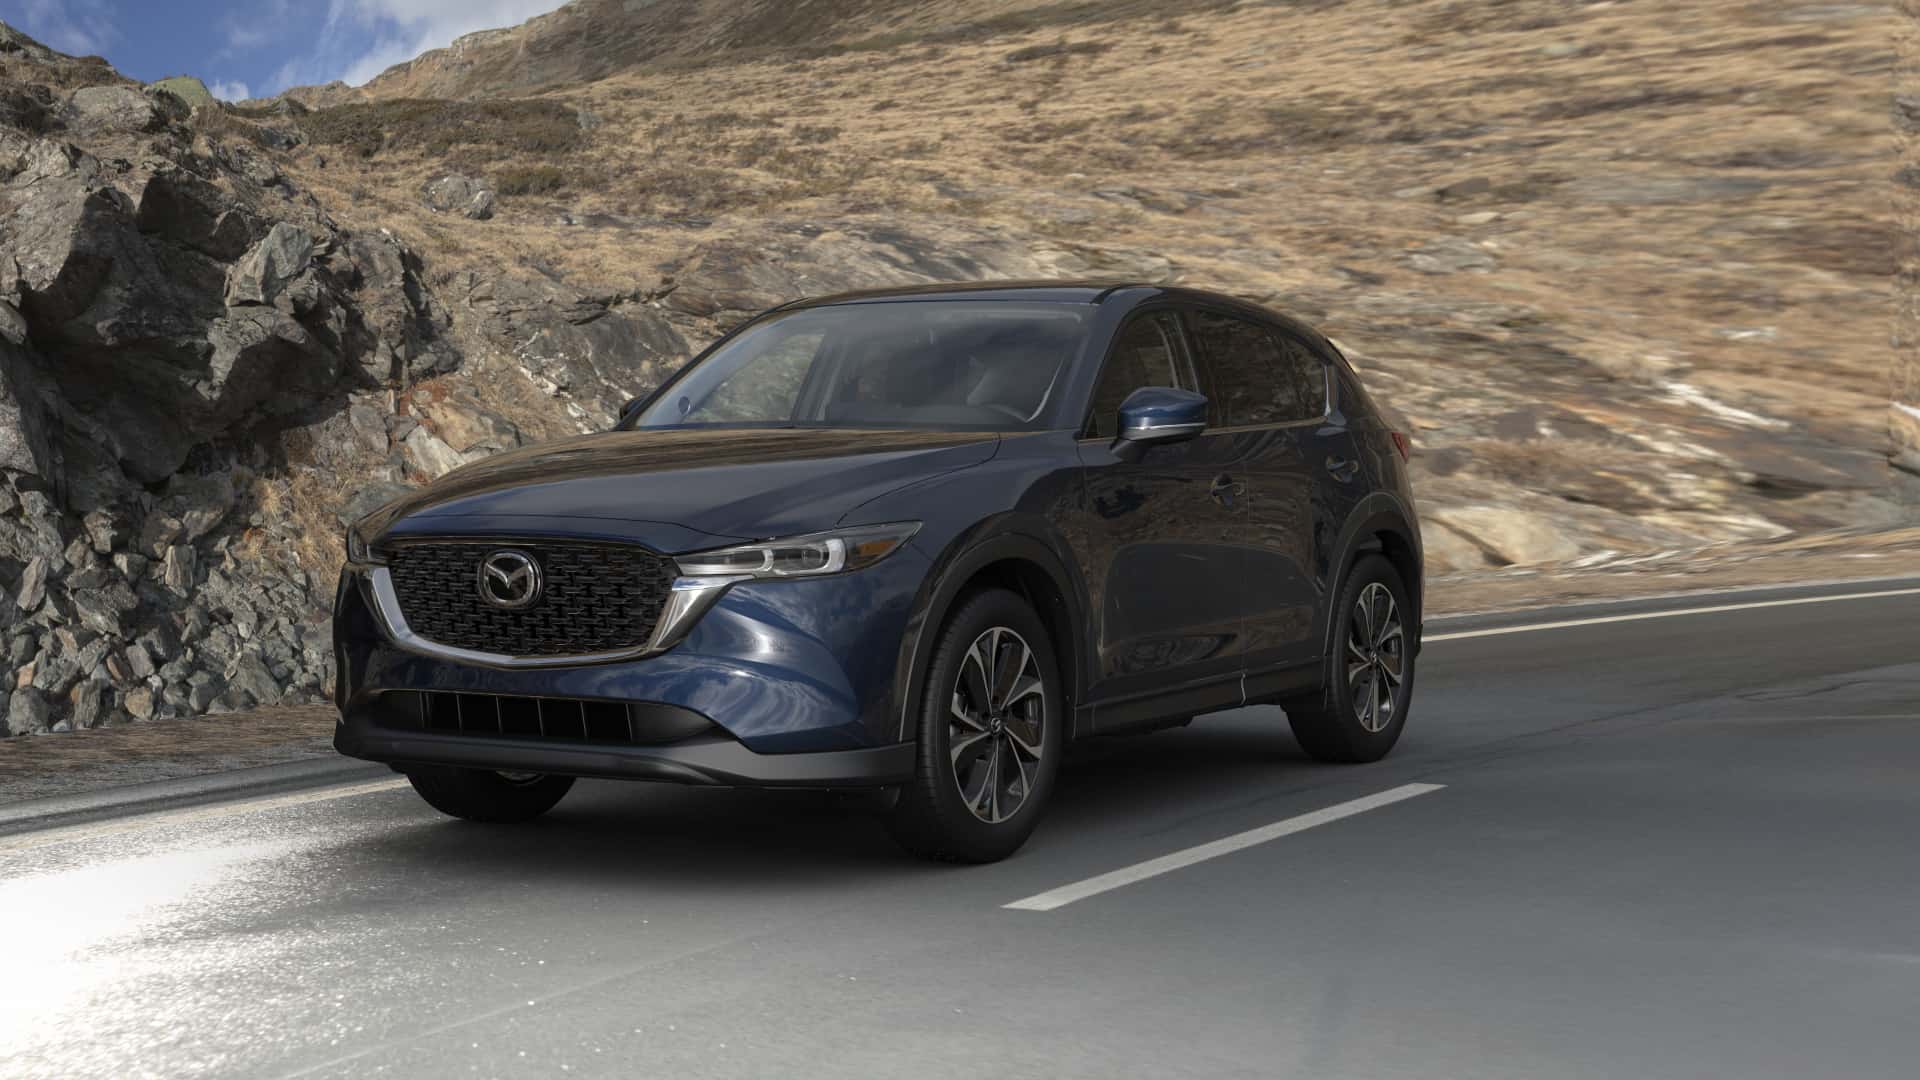 2023 Mazda CX-5 2.5 S Premium Deep Crystal Blue Mica | Mazda of South Charlotte in Pineville NC